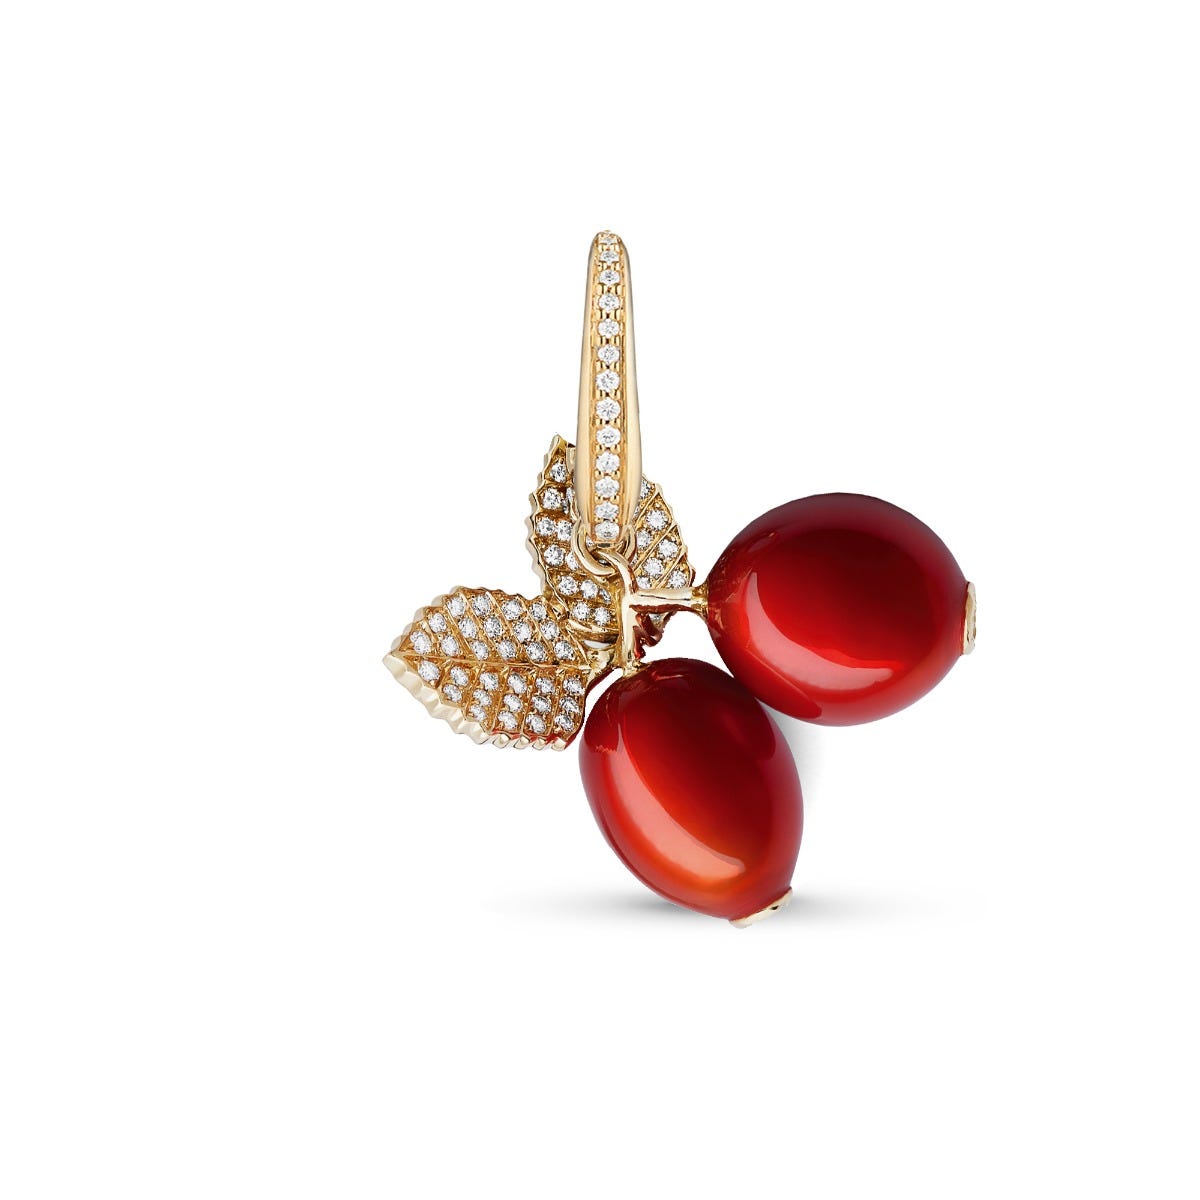 Woodland Rosehip Charm in Enamelled 18ct Yellow Gold with Diamonds